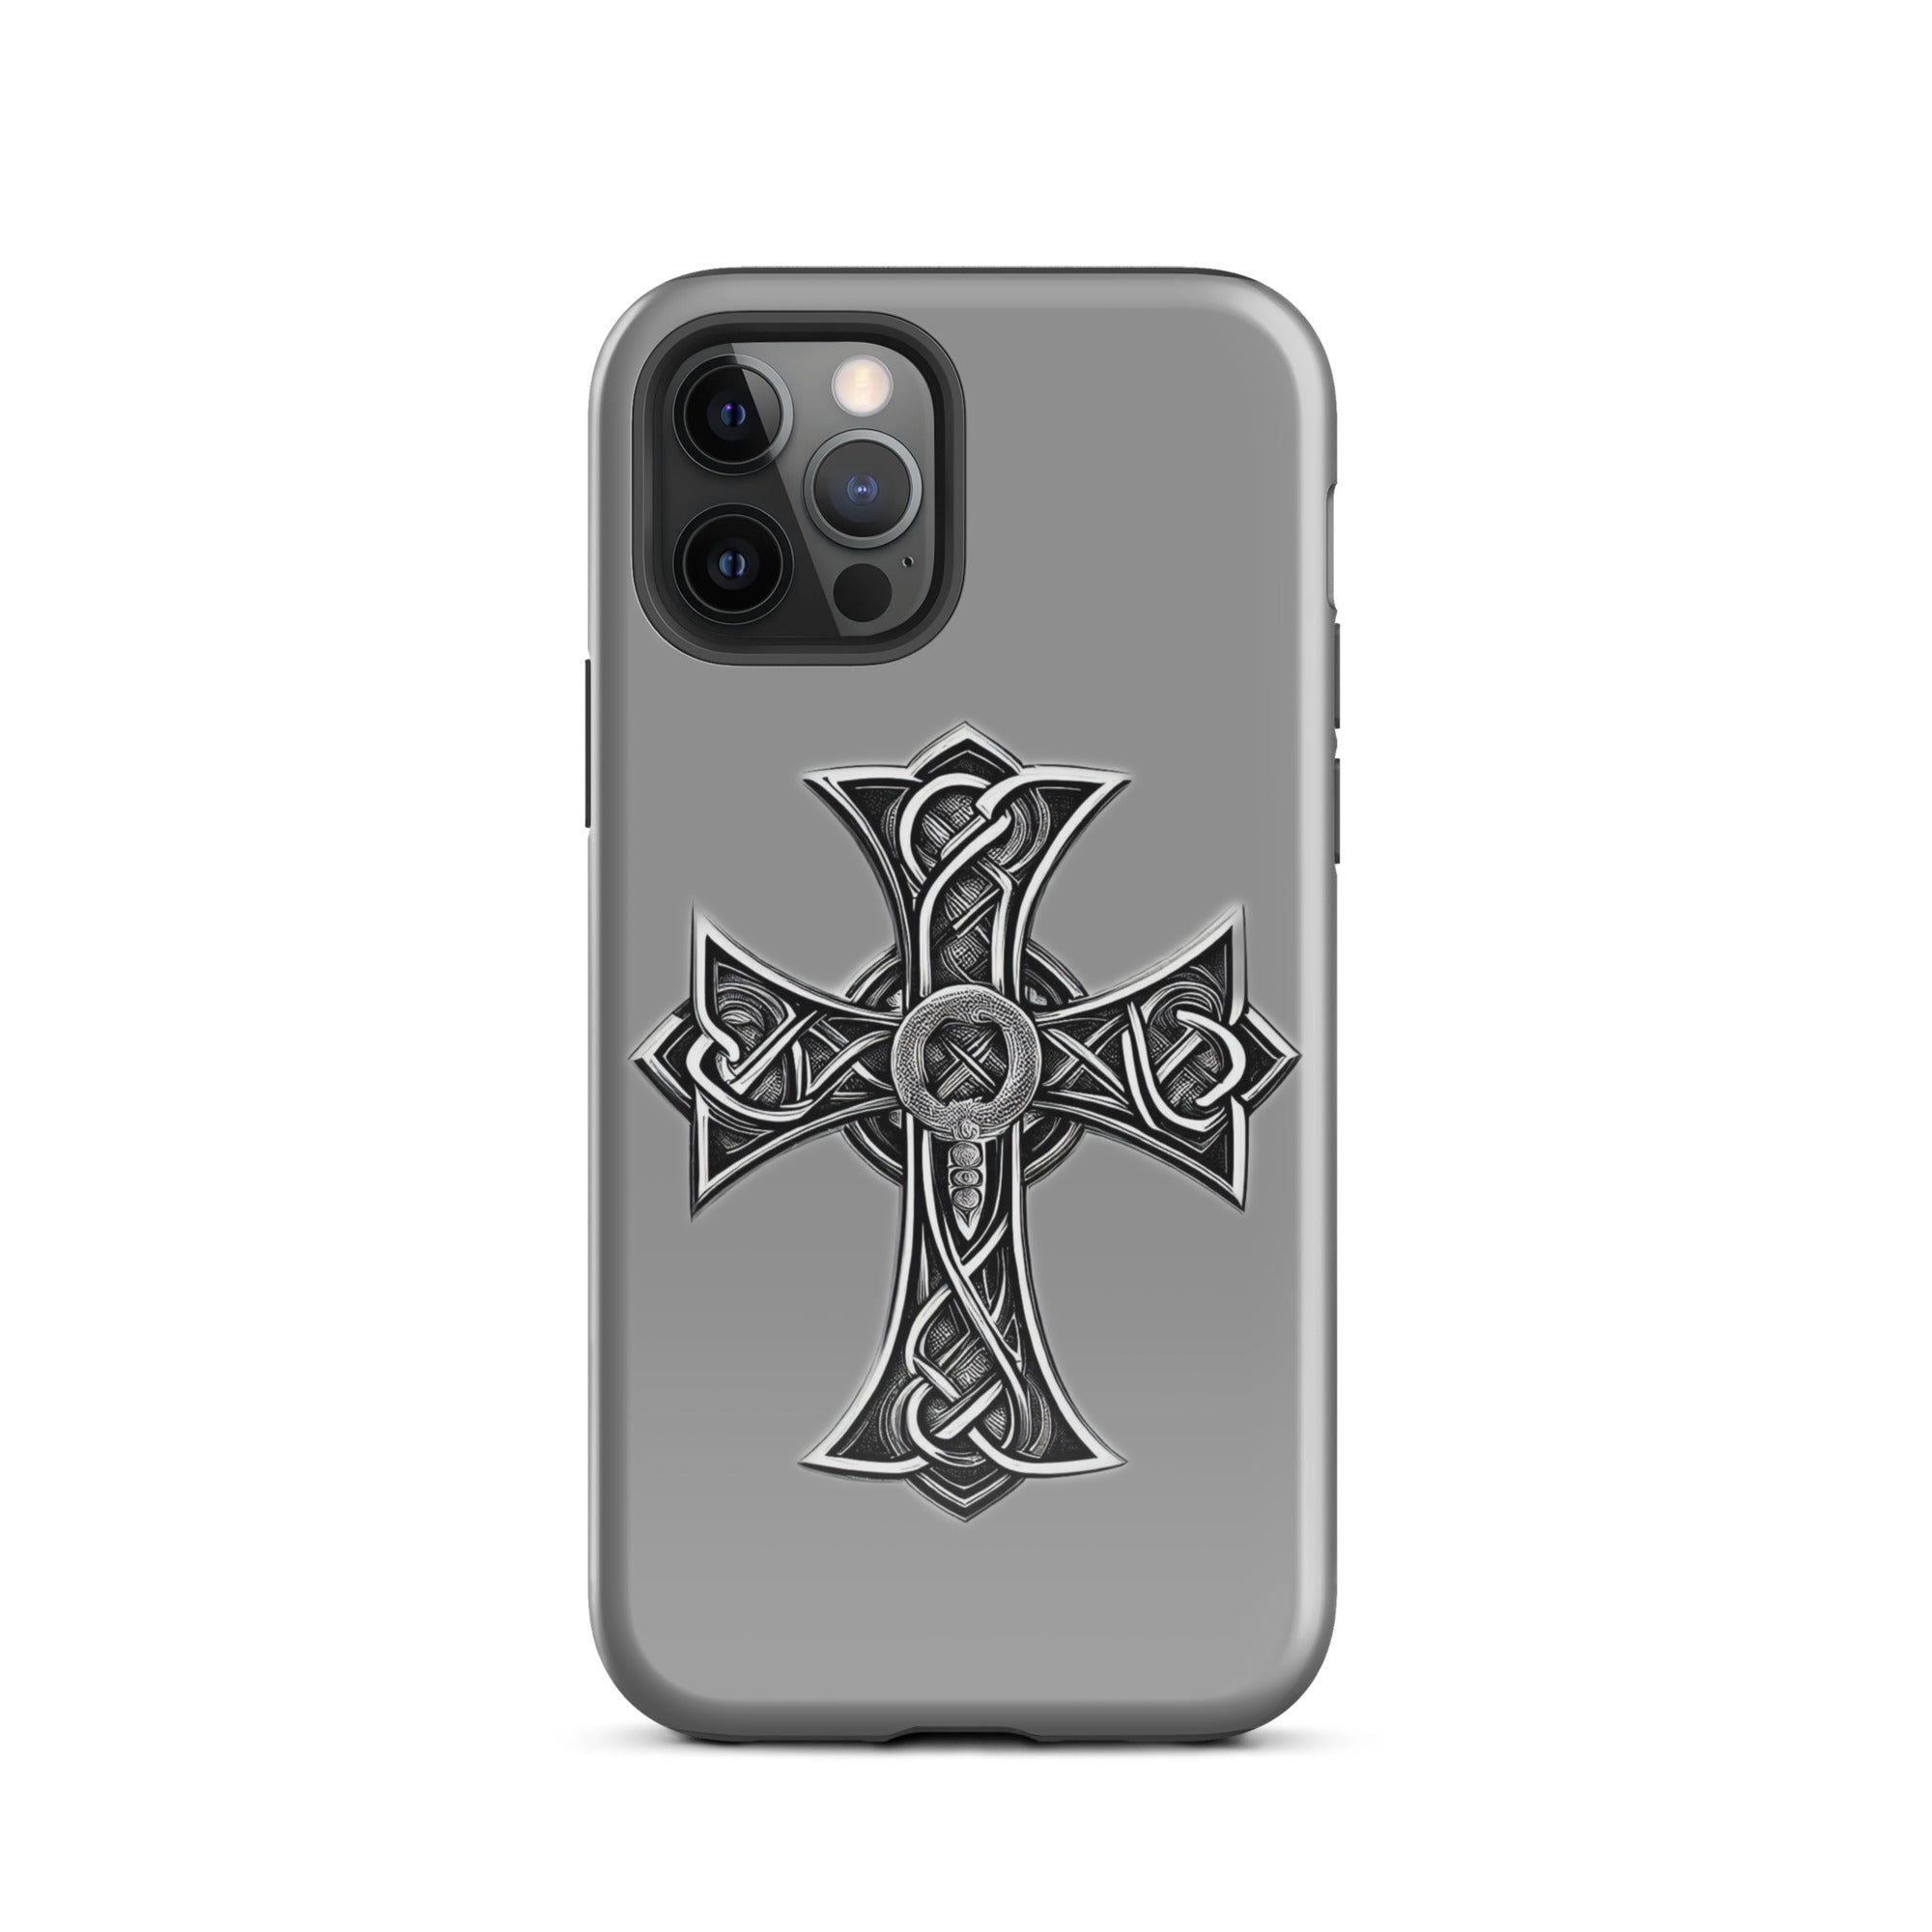 tough-case-for-iphone-glossy-iphone-12-pro-front-6563847713f76.jpg